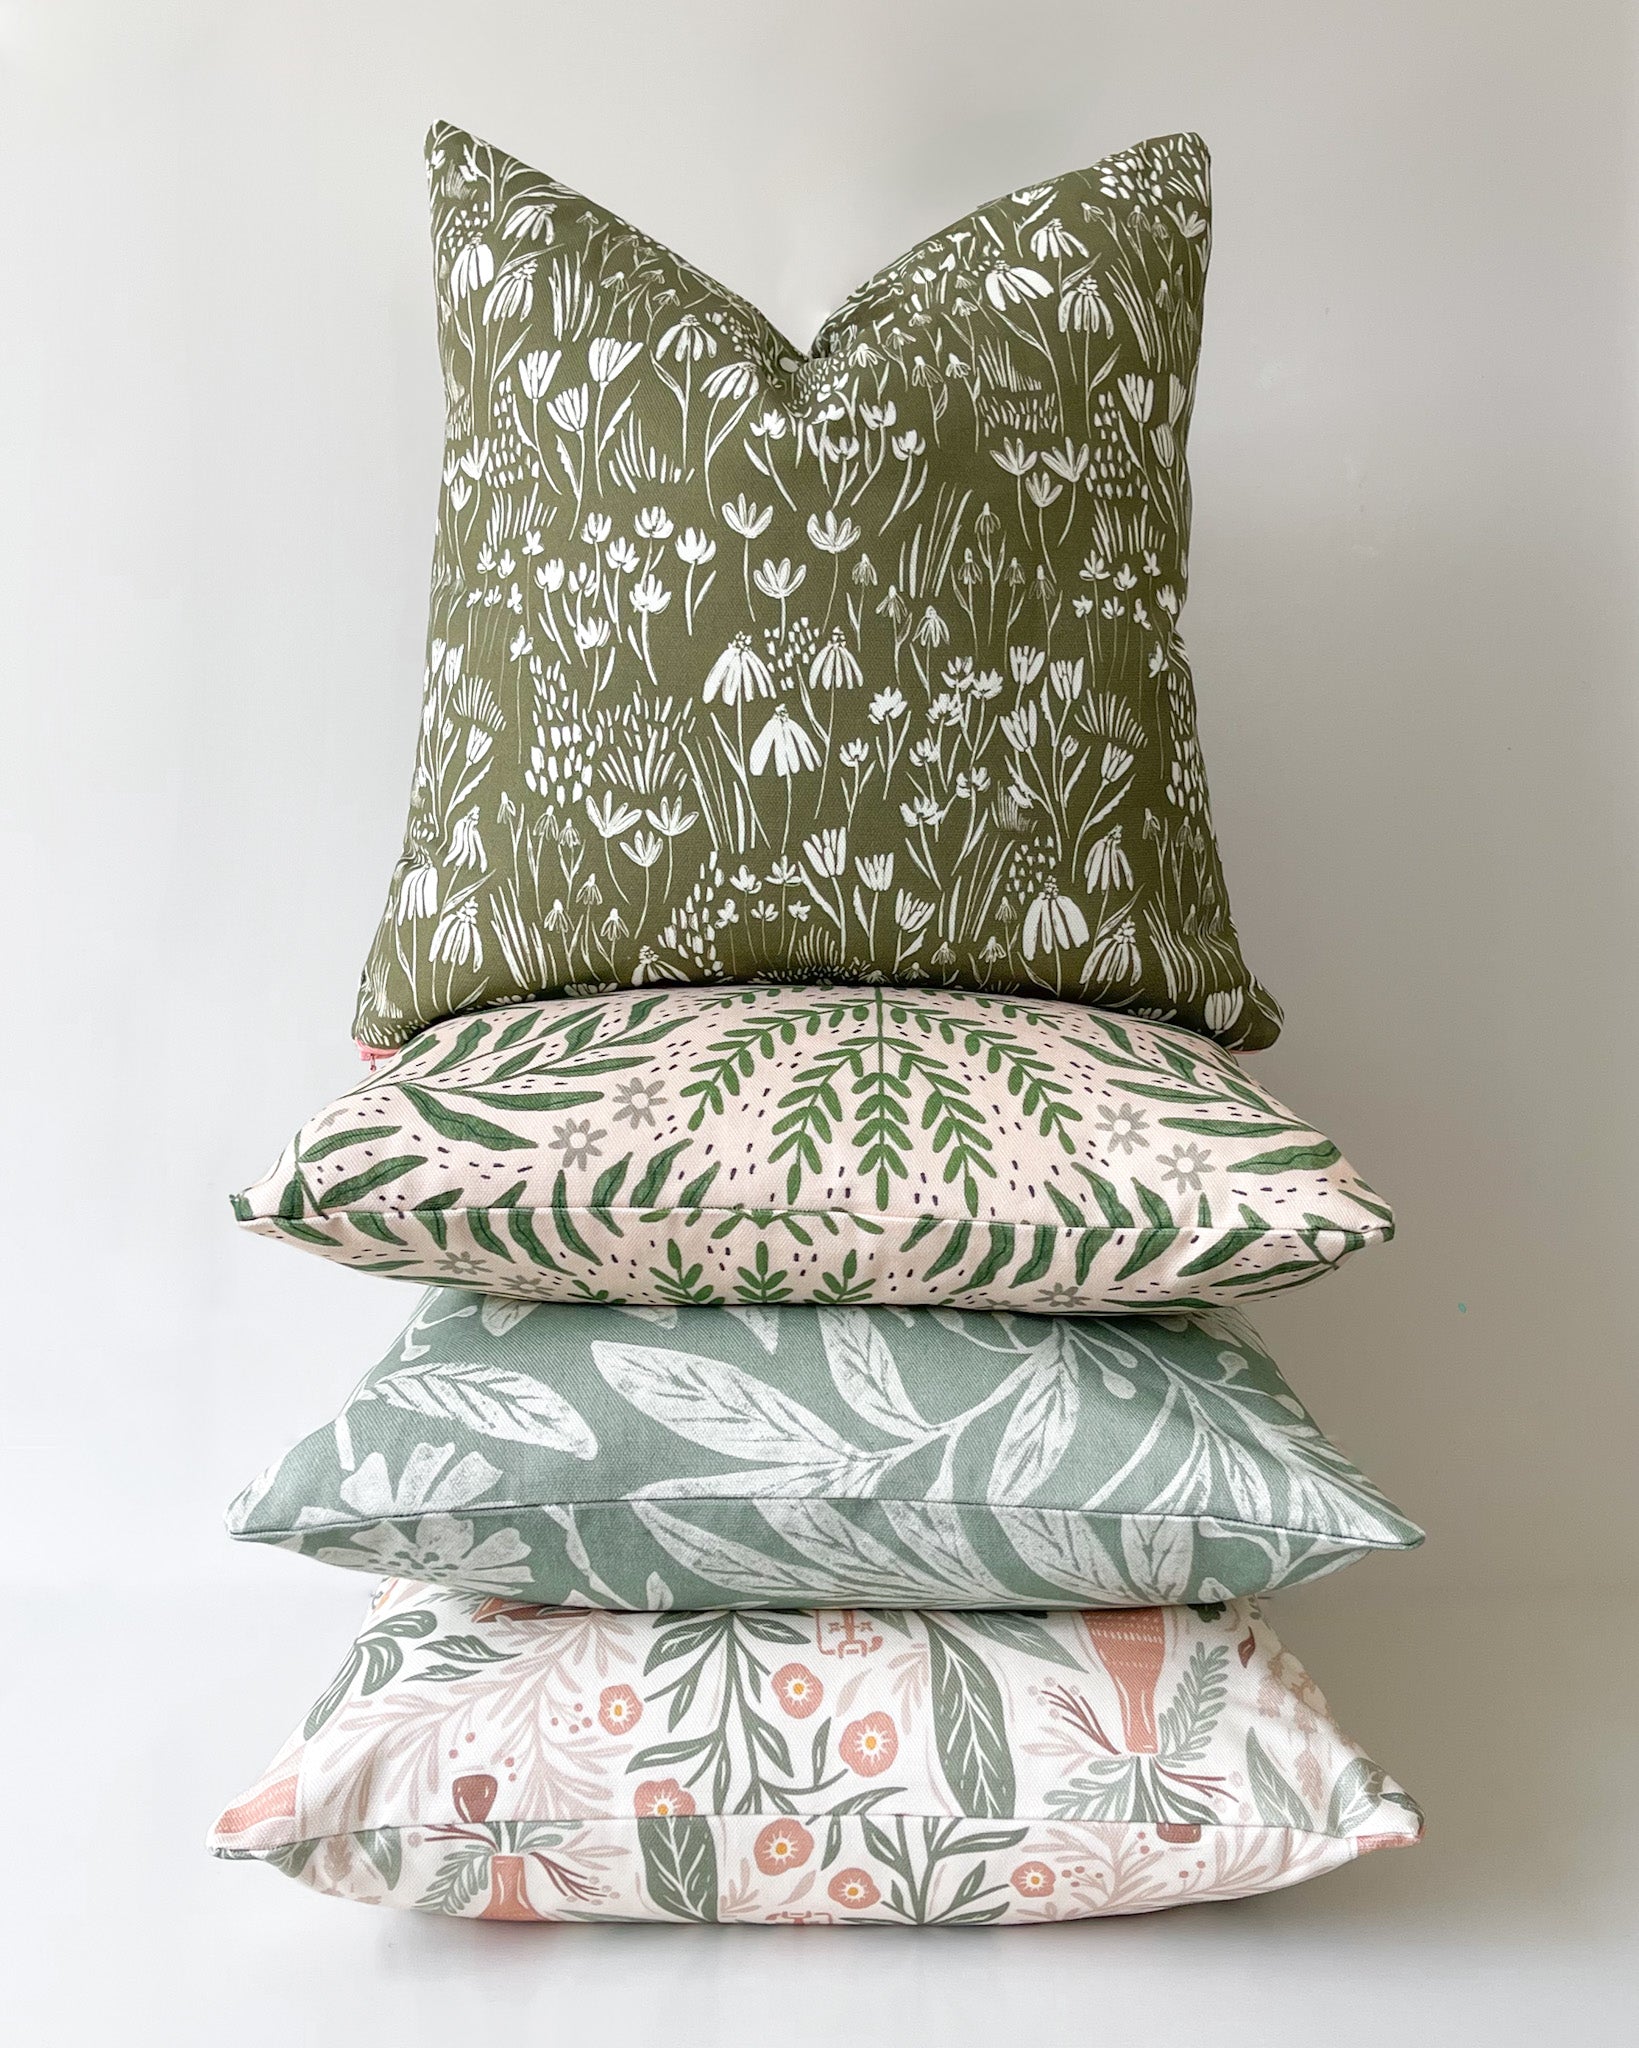 Green floral cushion for decor inspired by nature. Handcrafted cushion in basketweave cotton with a duck feather insert, designed by independent artists.